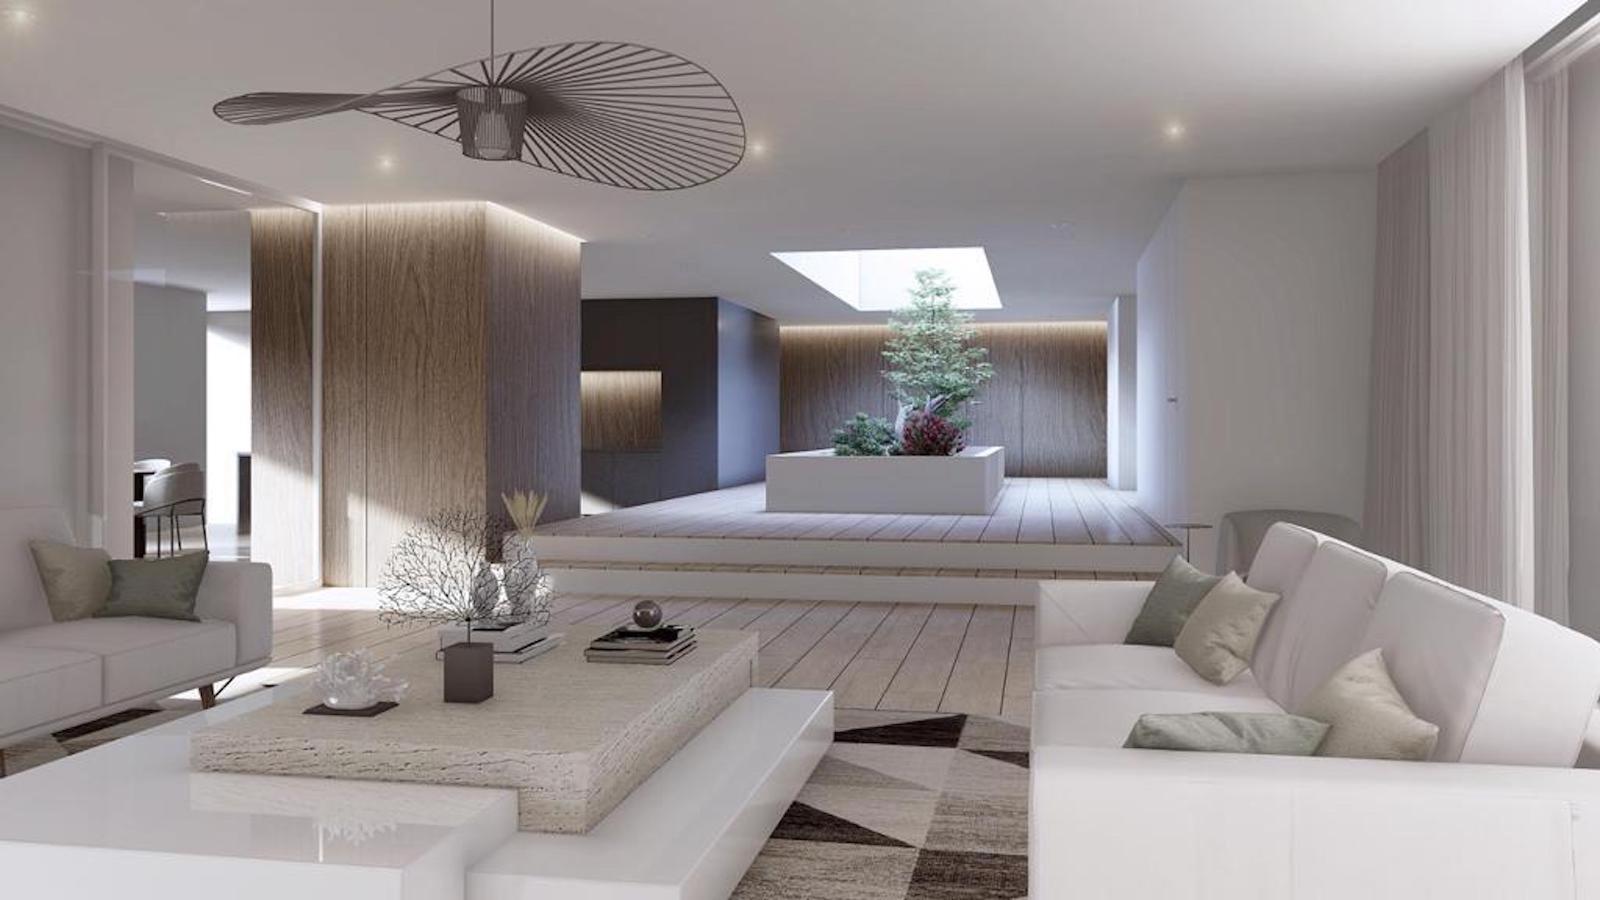  Modern penthouse project in Puerto Banus